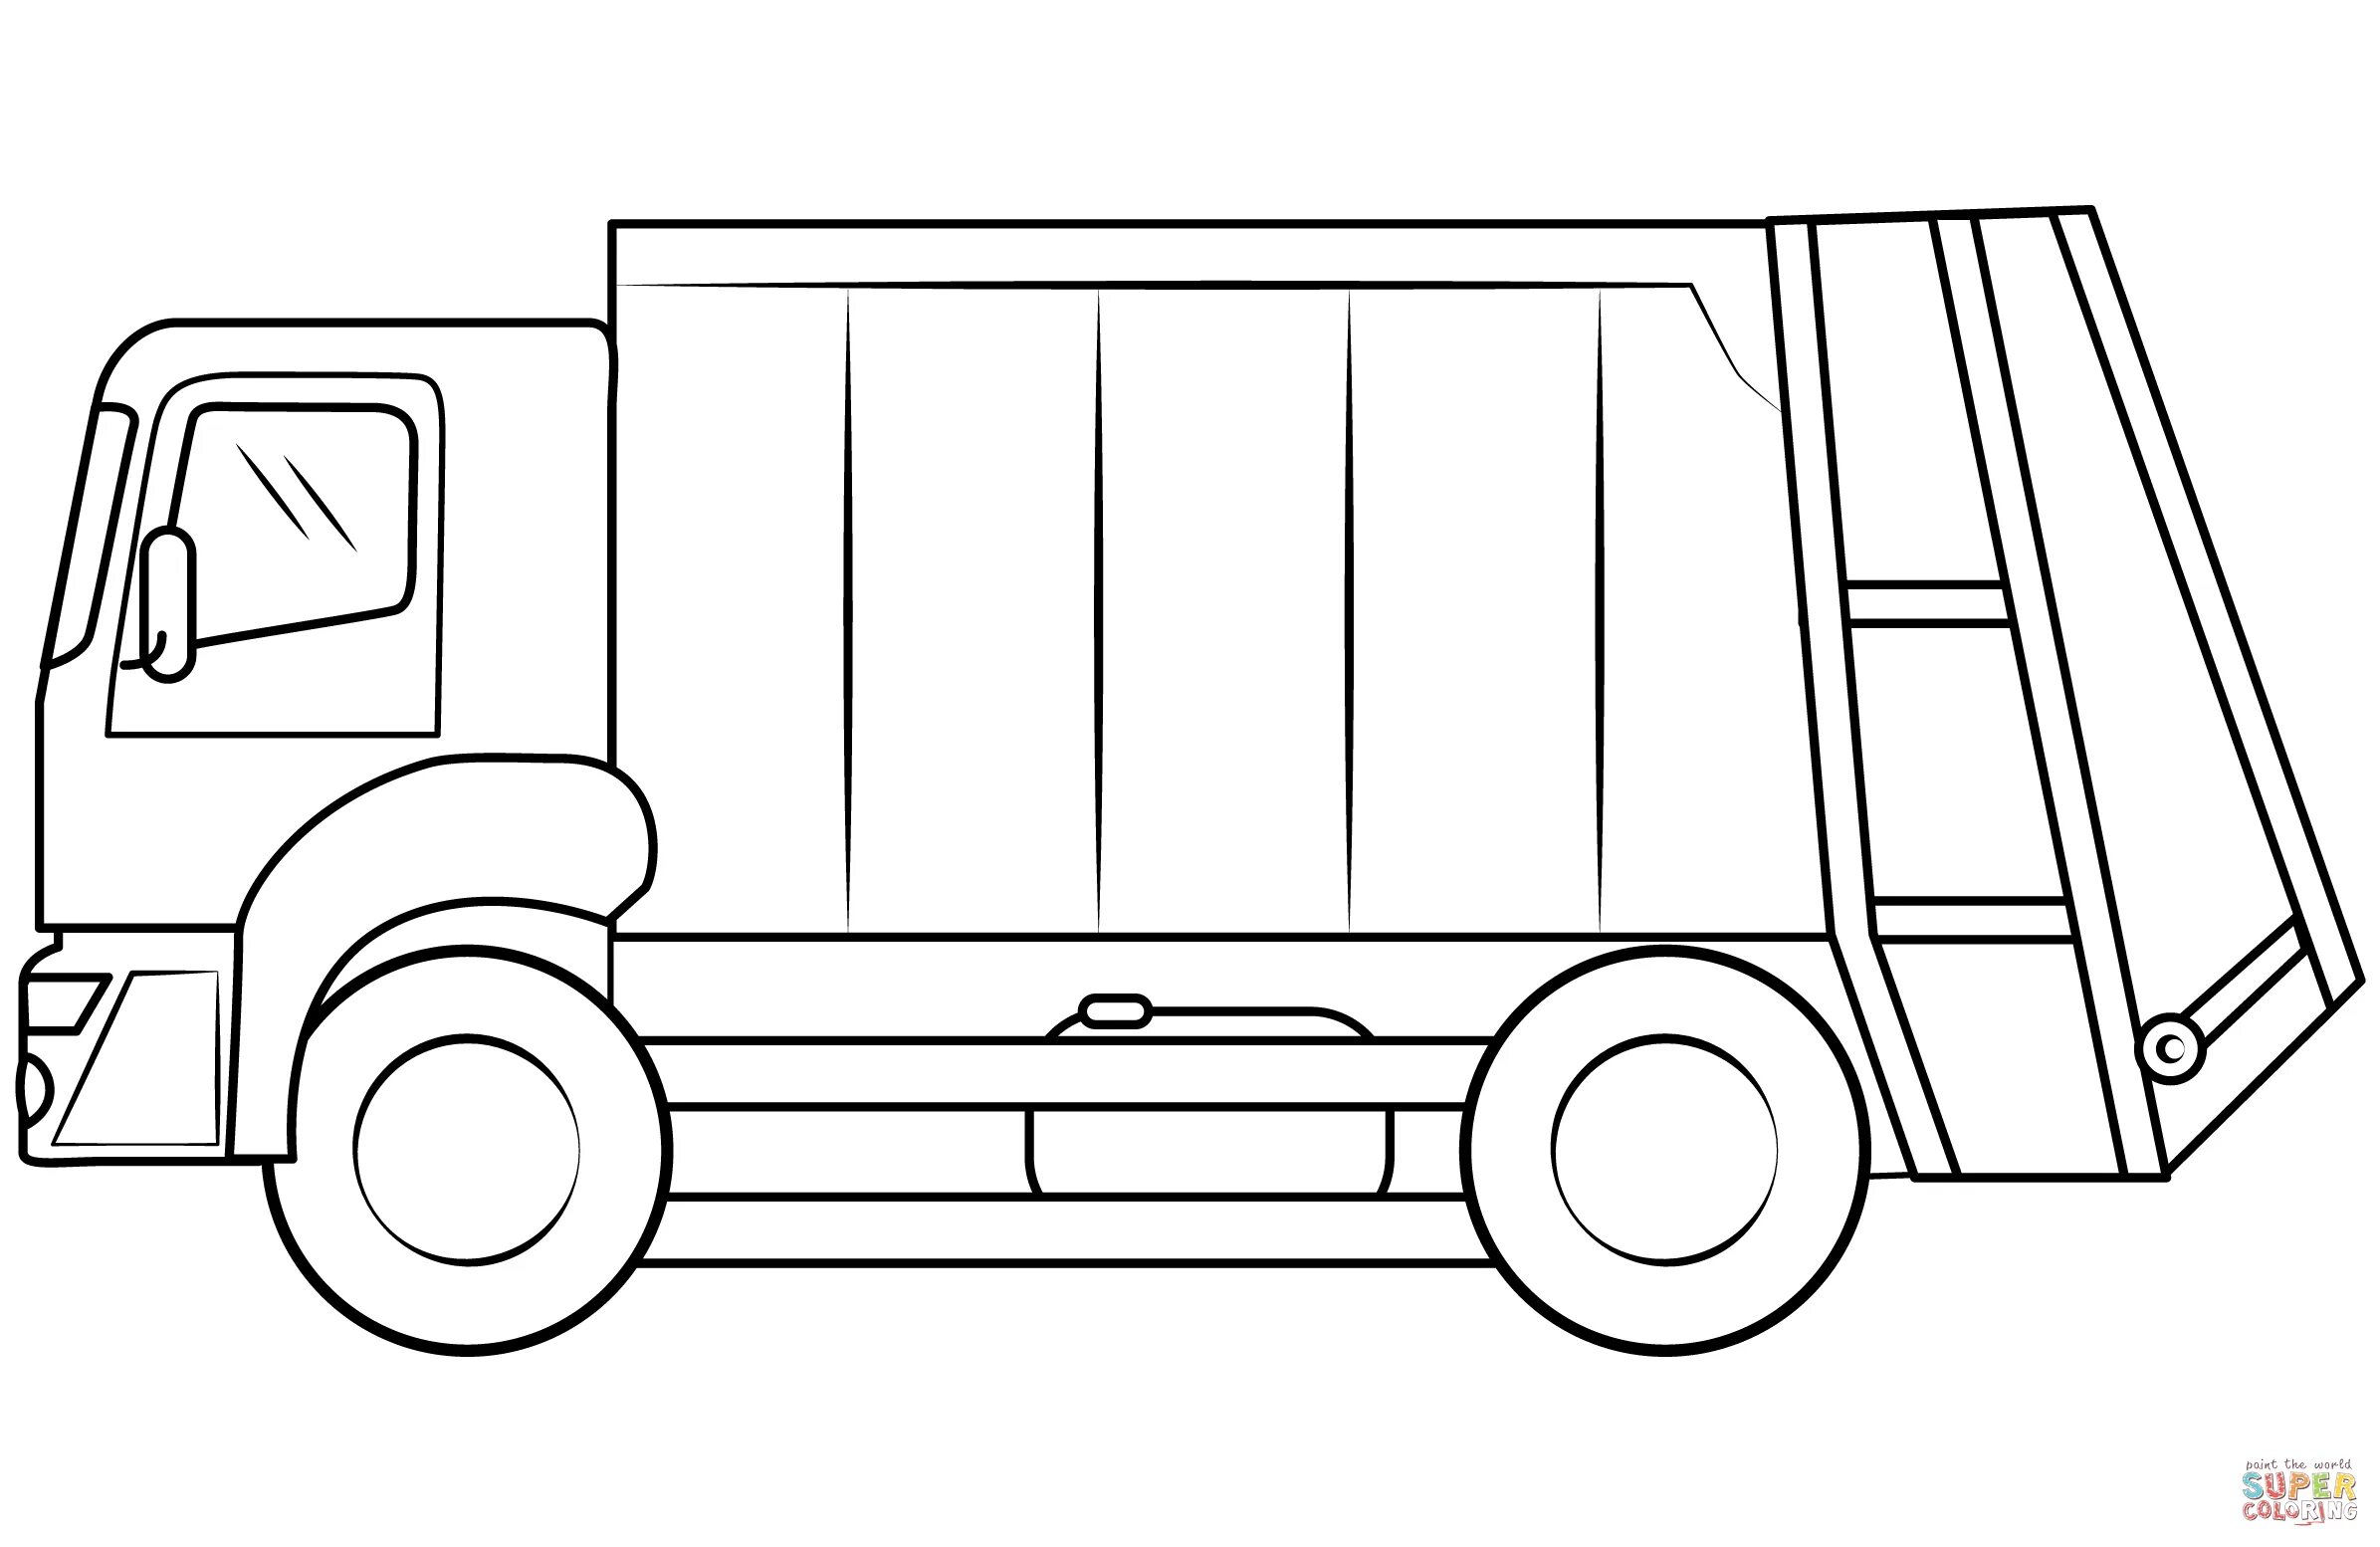 Adorable Garbage Truck Coloring Page for Preschoolers